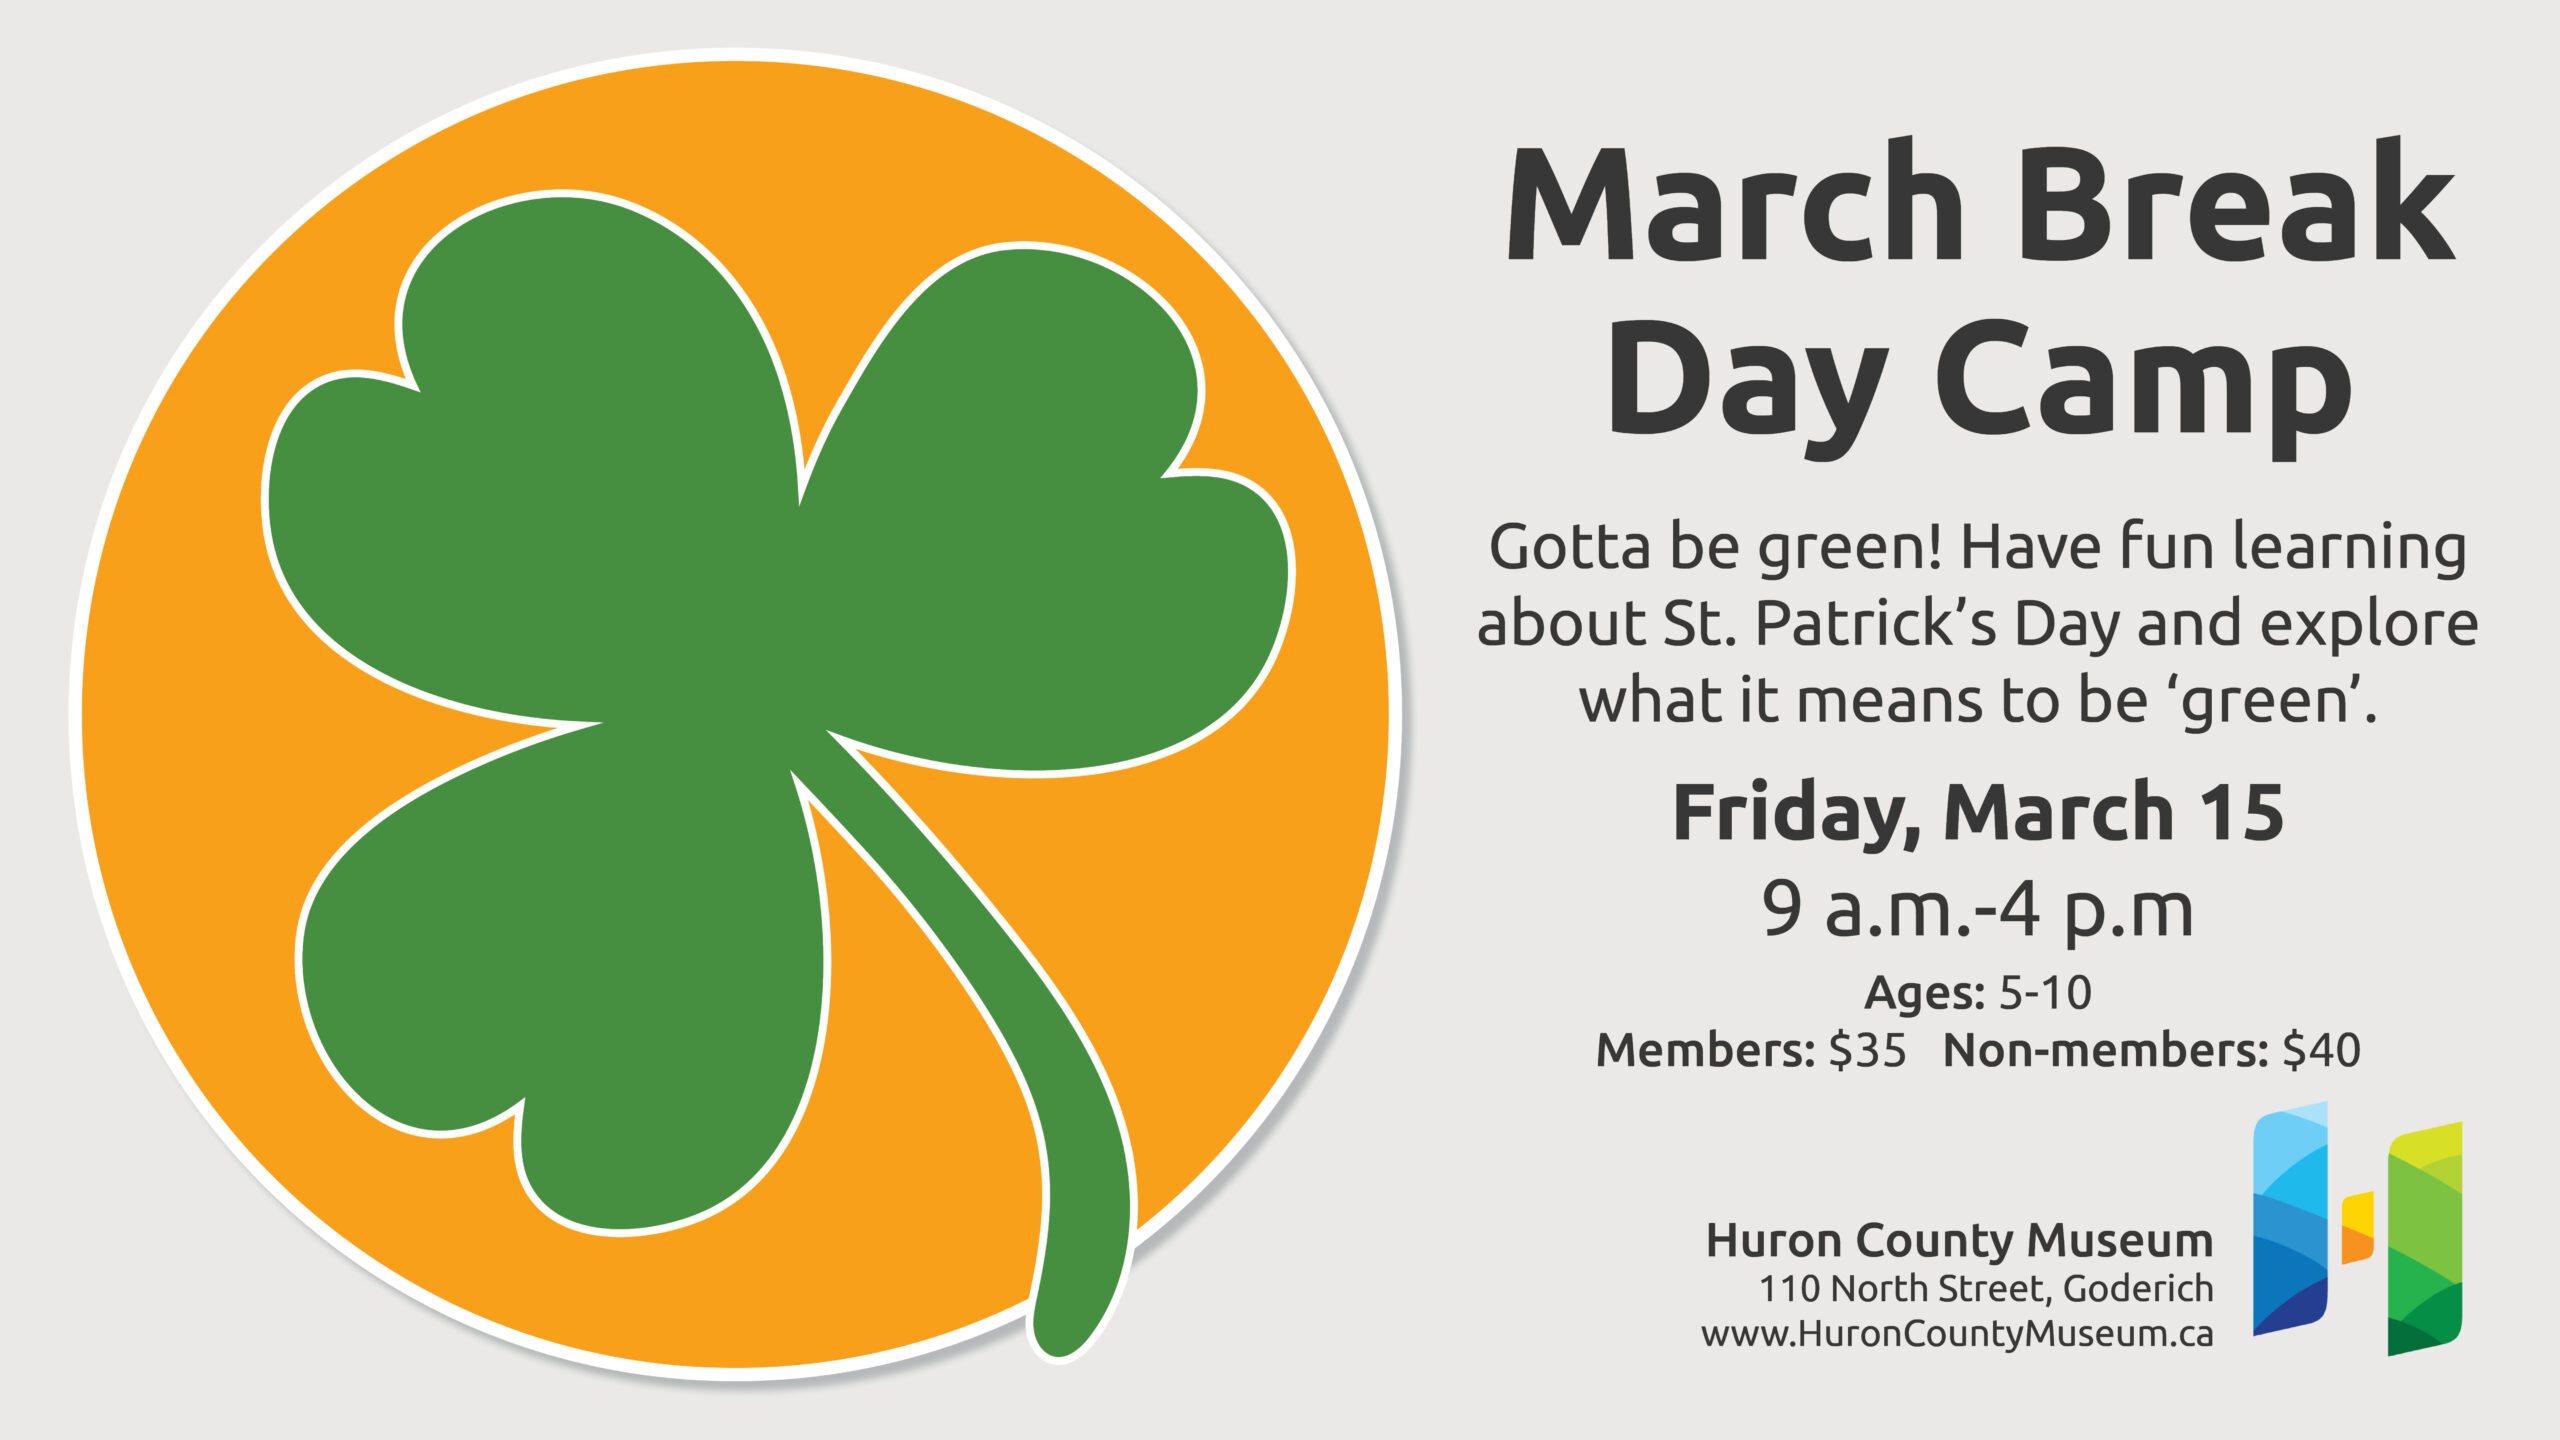 Illustration of a green shamrock with text promoting March Break Day Camp